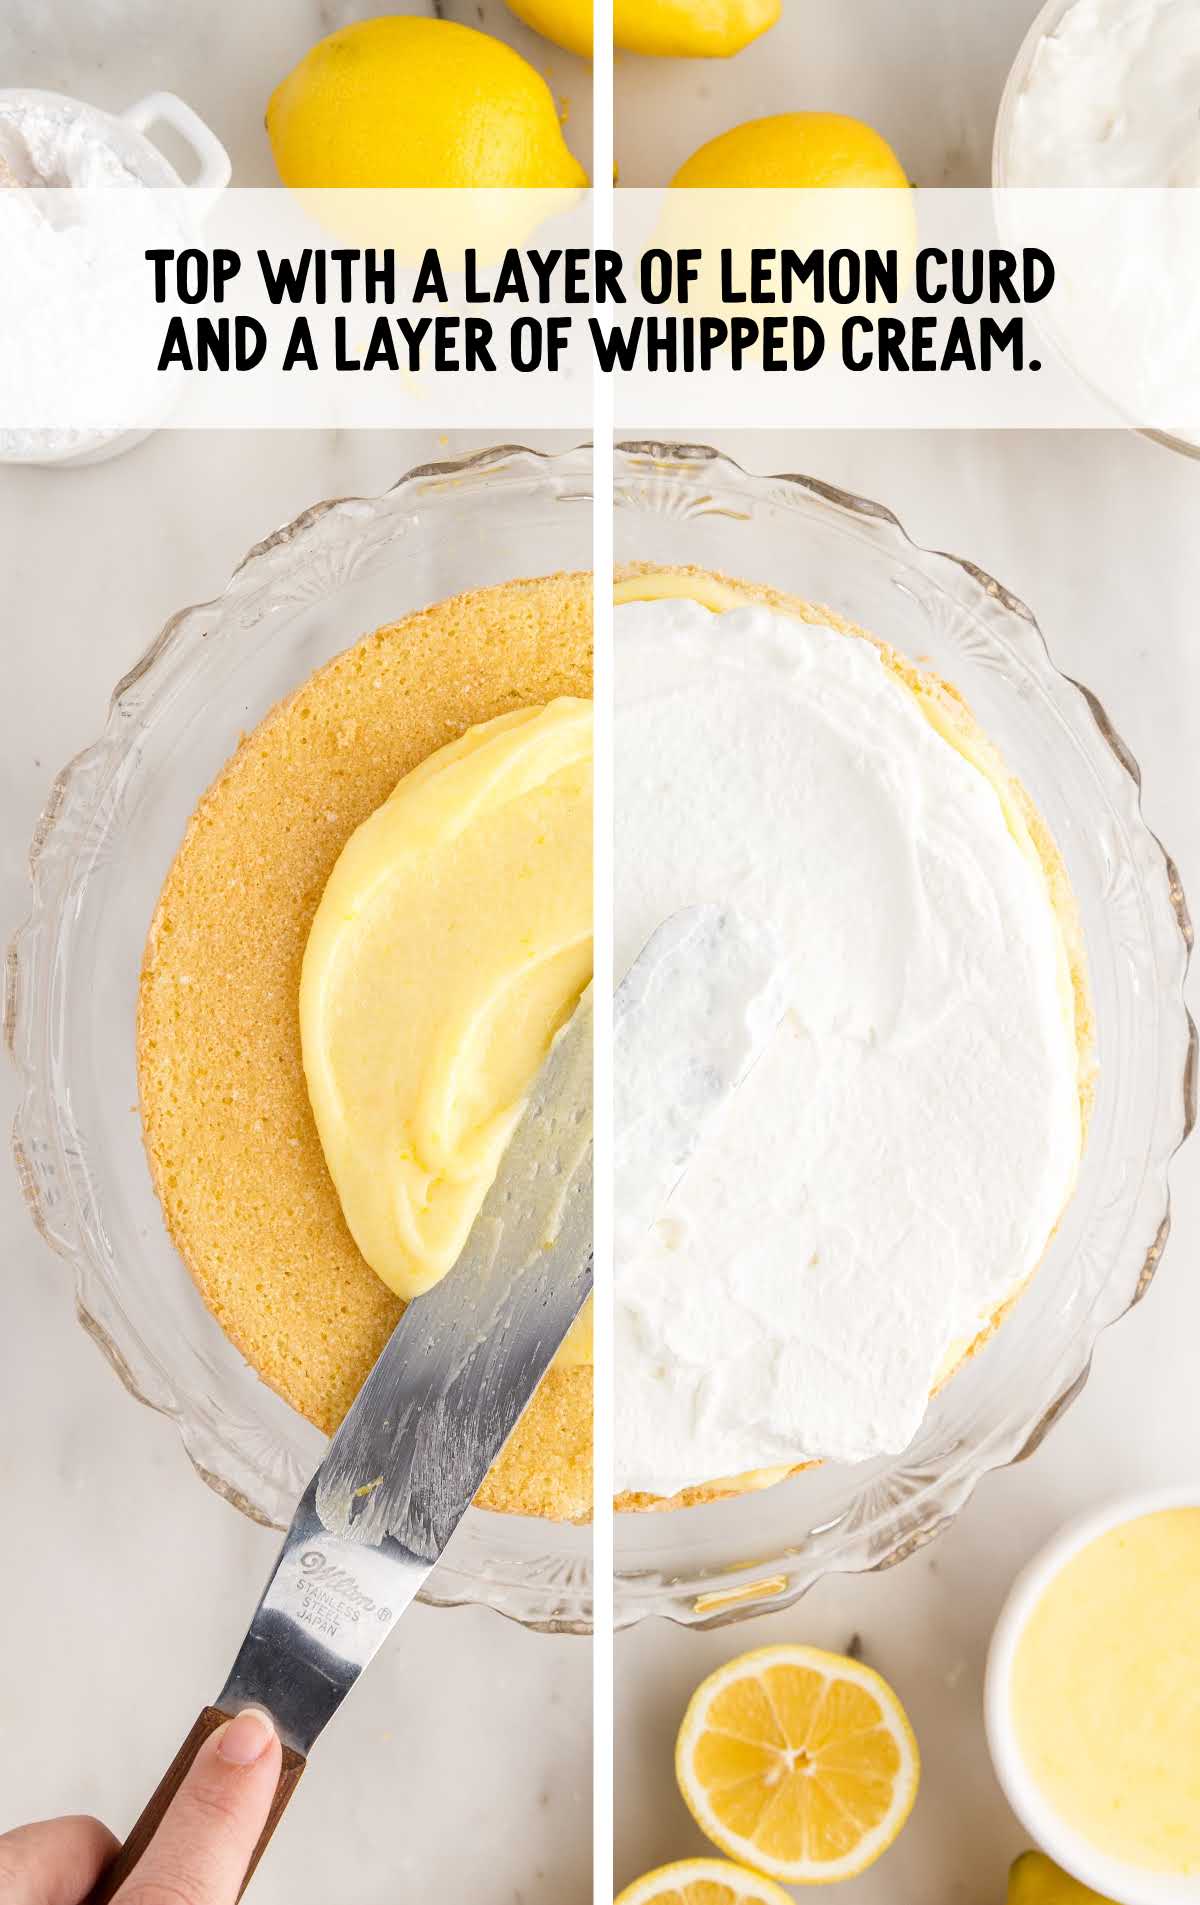 cake topped with lemon curd and whipped cream